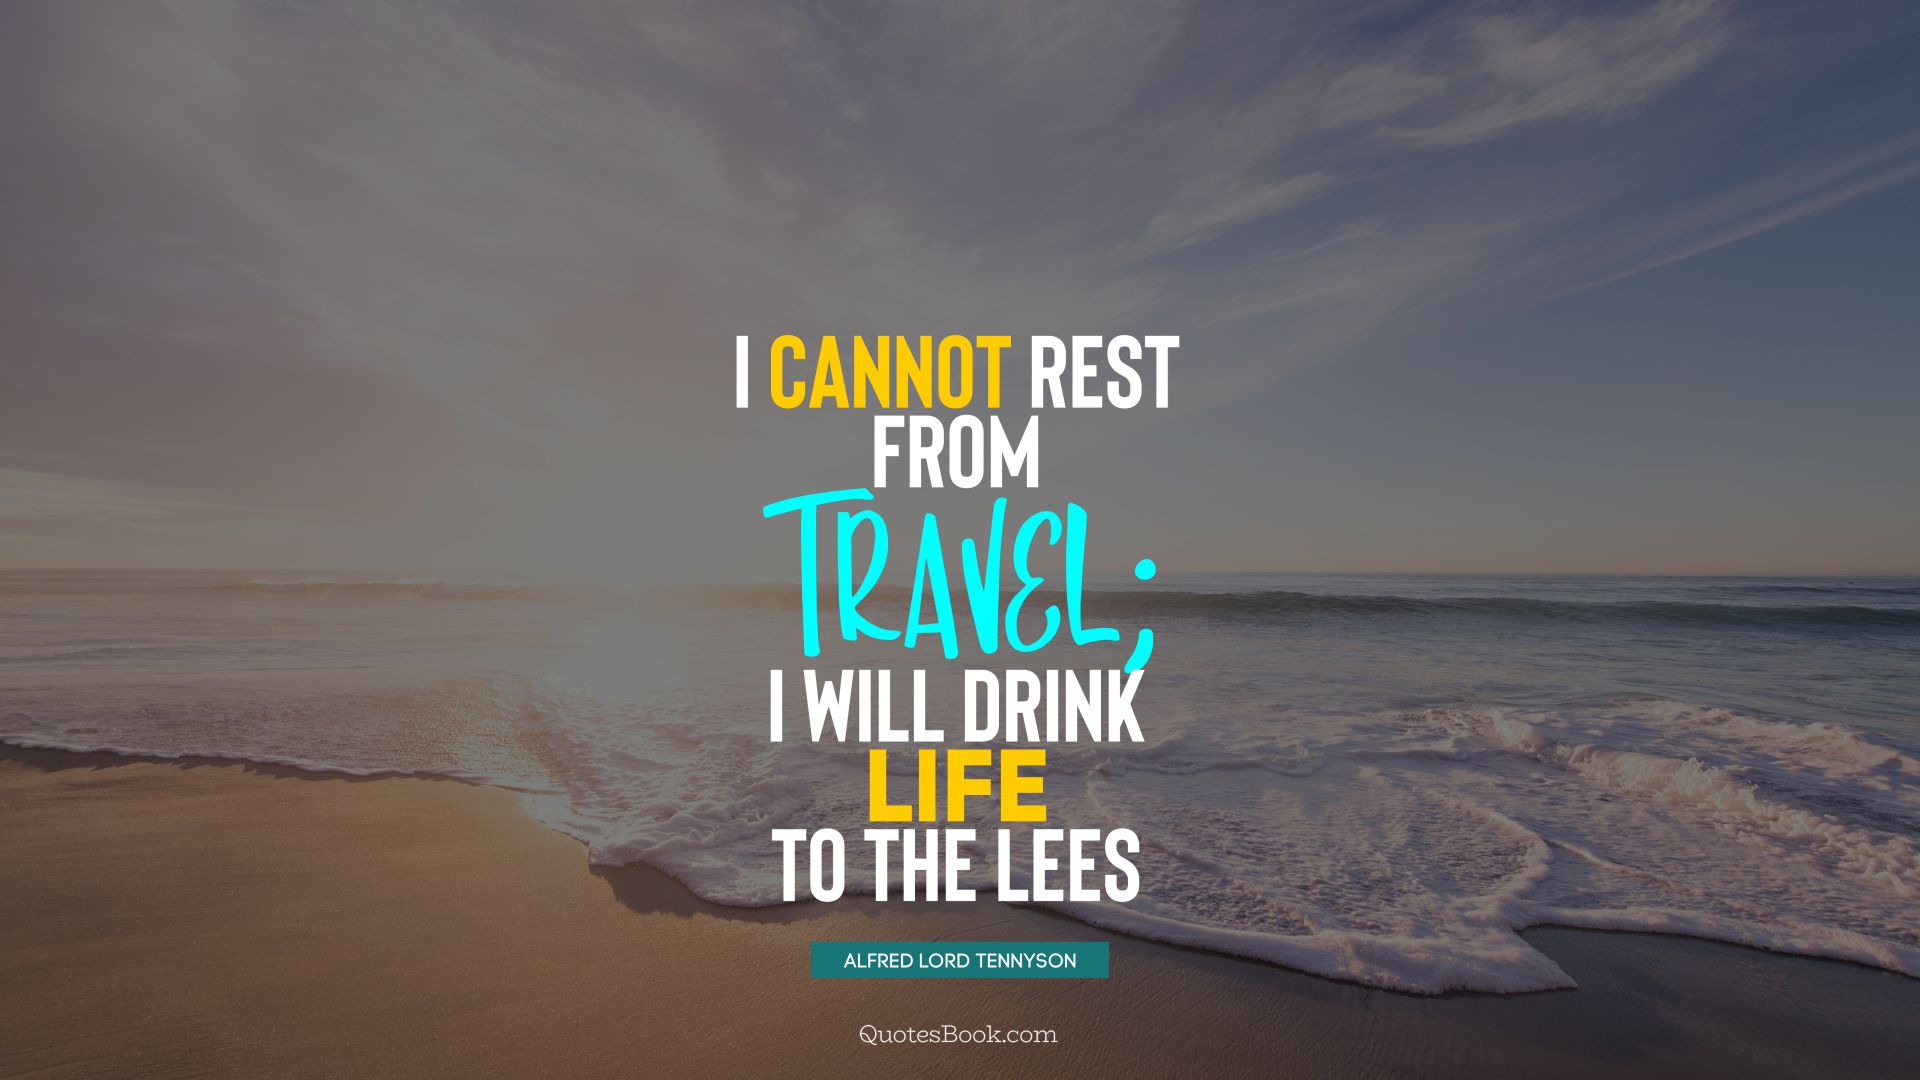 I cannot rest from travel; I will drink Life to the lees. - Quote by Alfred Lord Tennyson